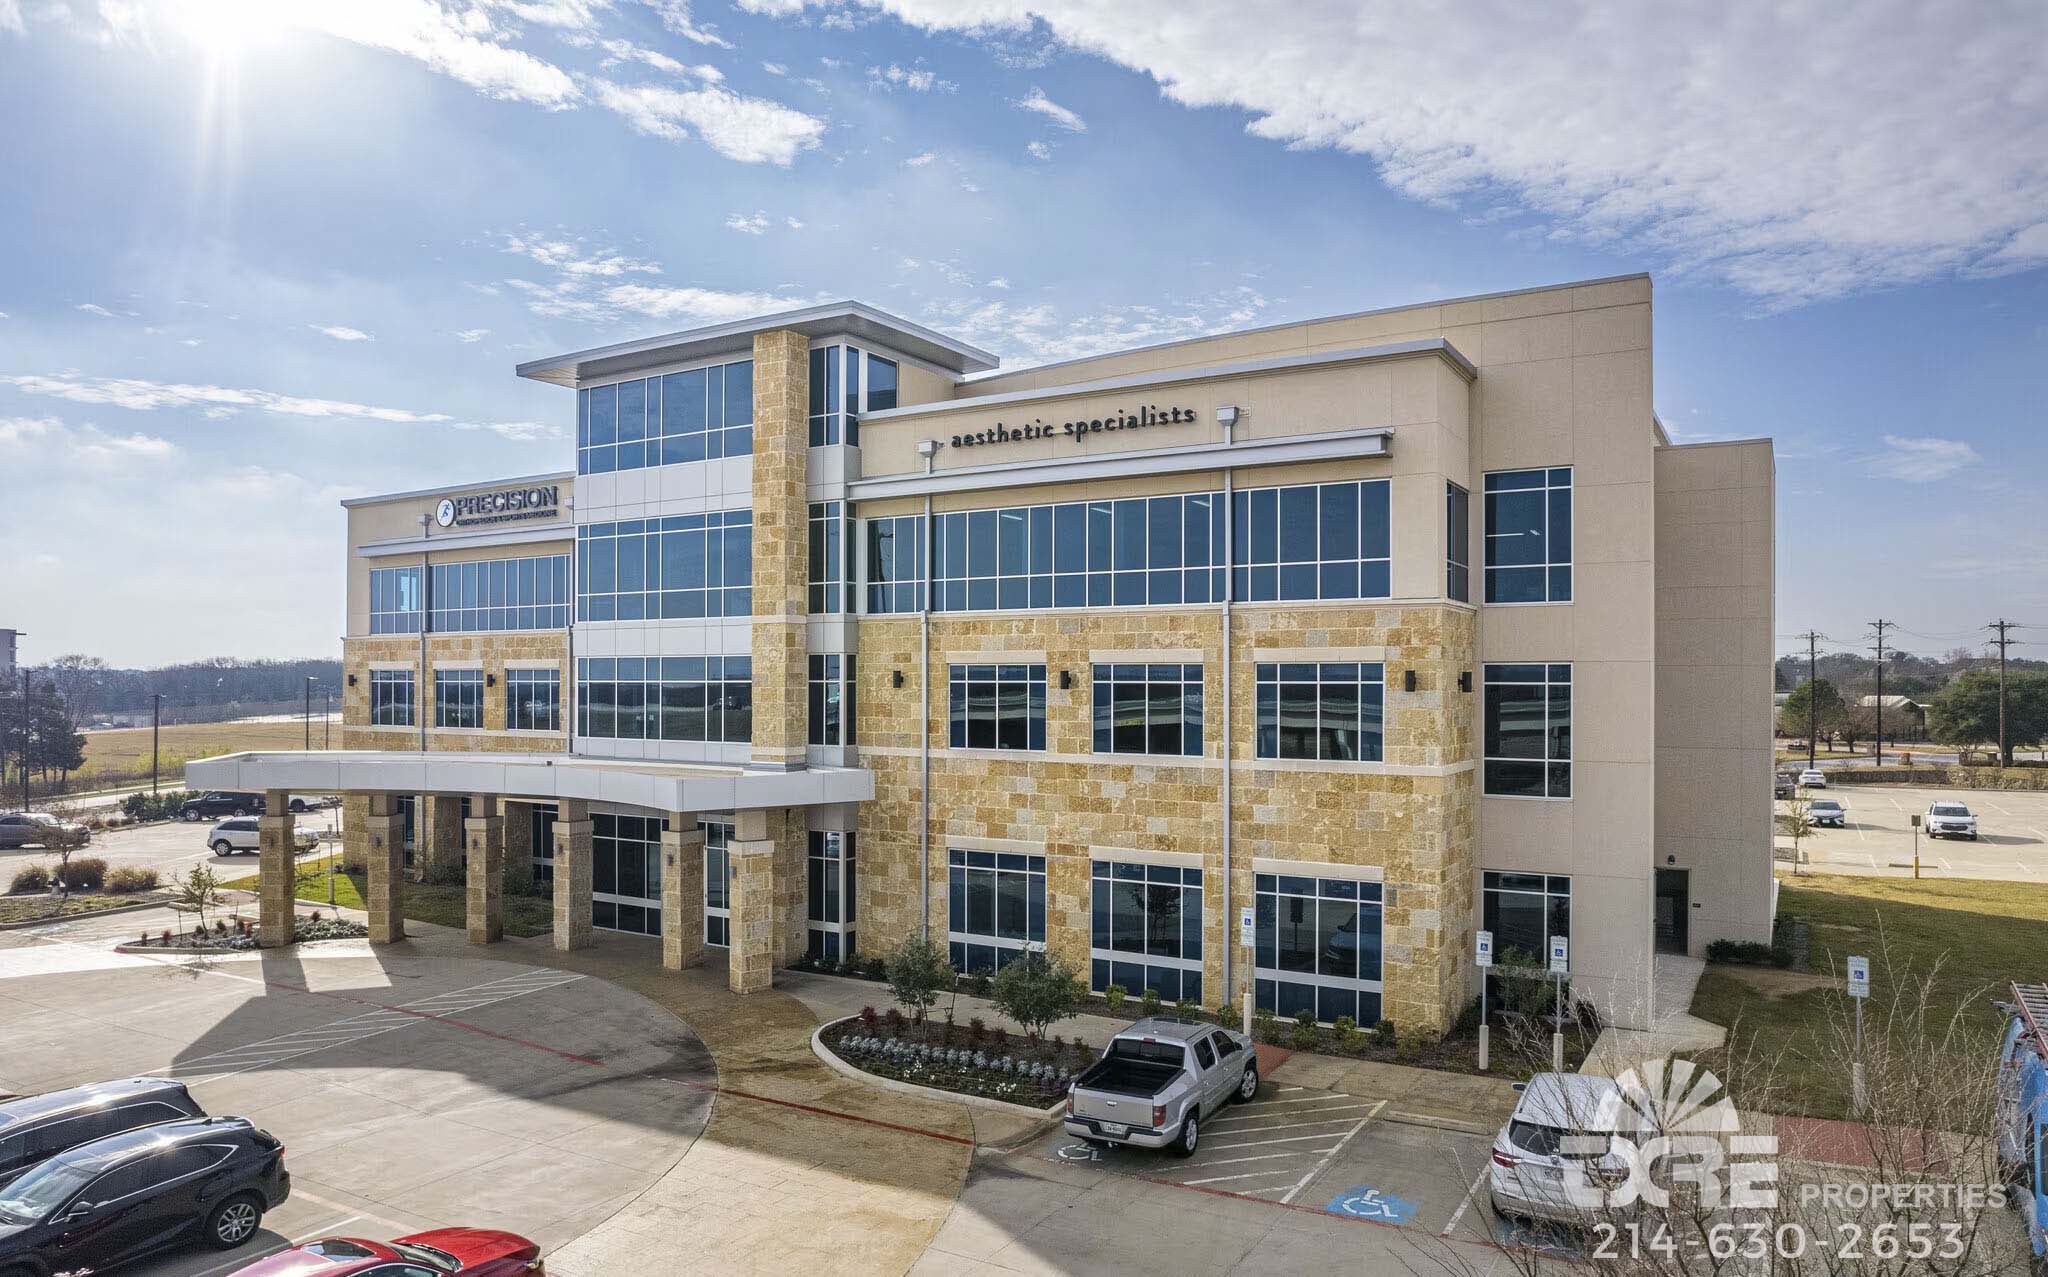 Exterior view of Chapel Crossing medical office building in Southlake, TX